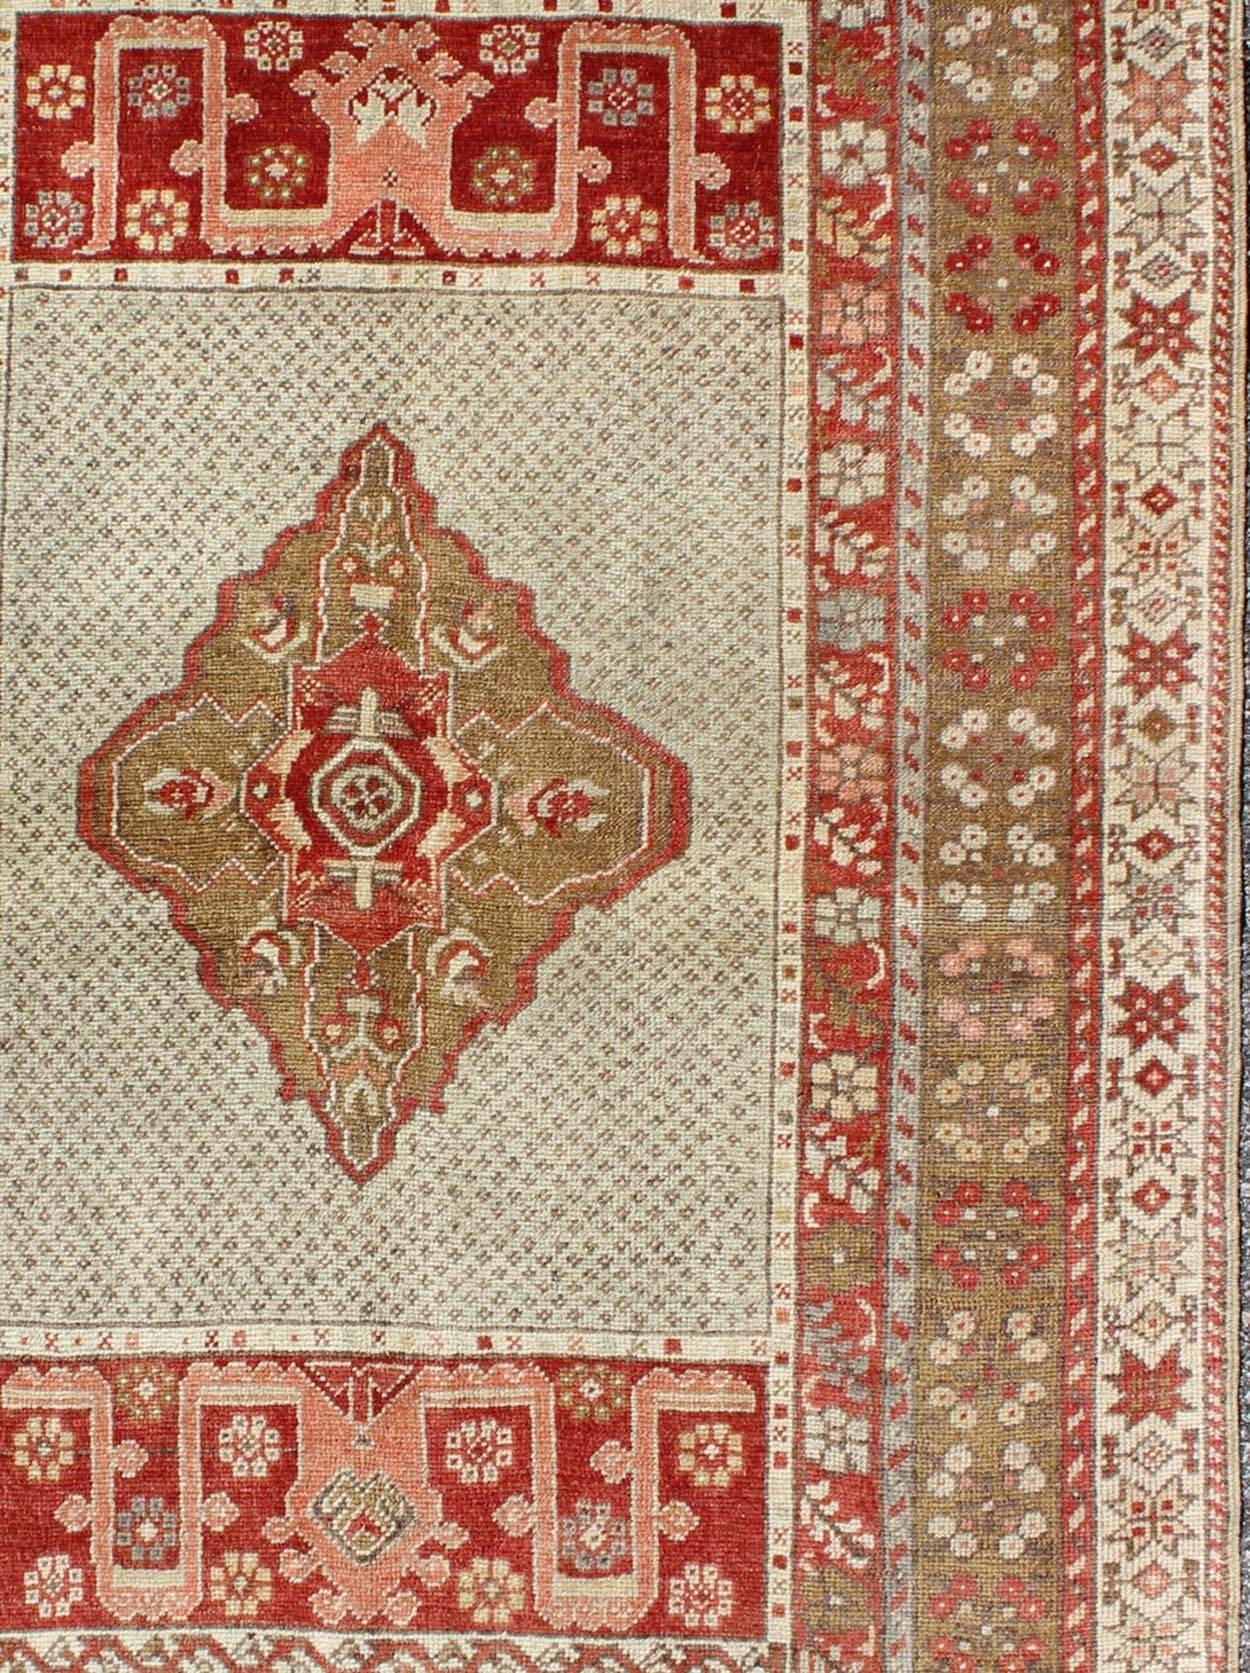  Antique Medallion Turkish Small Oushak Carpet in Various Green Tones & Red In Excellent Condition For Sale In Atlanta, GA